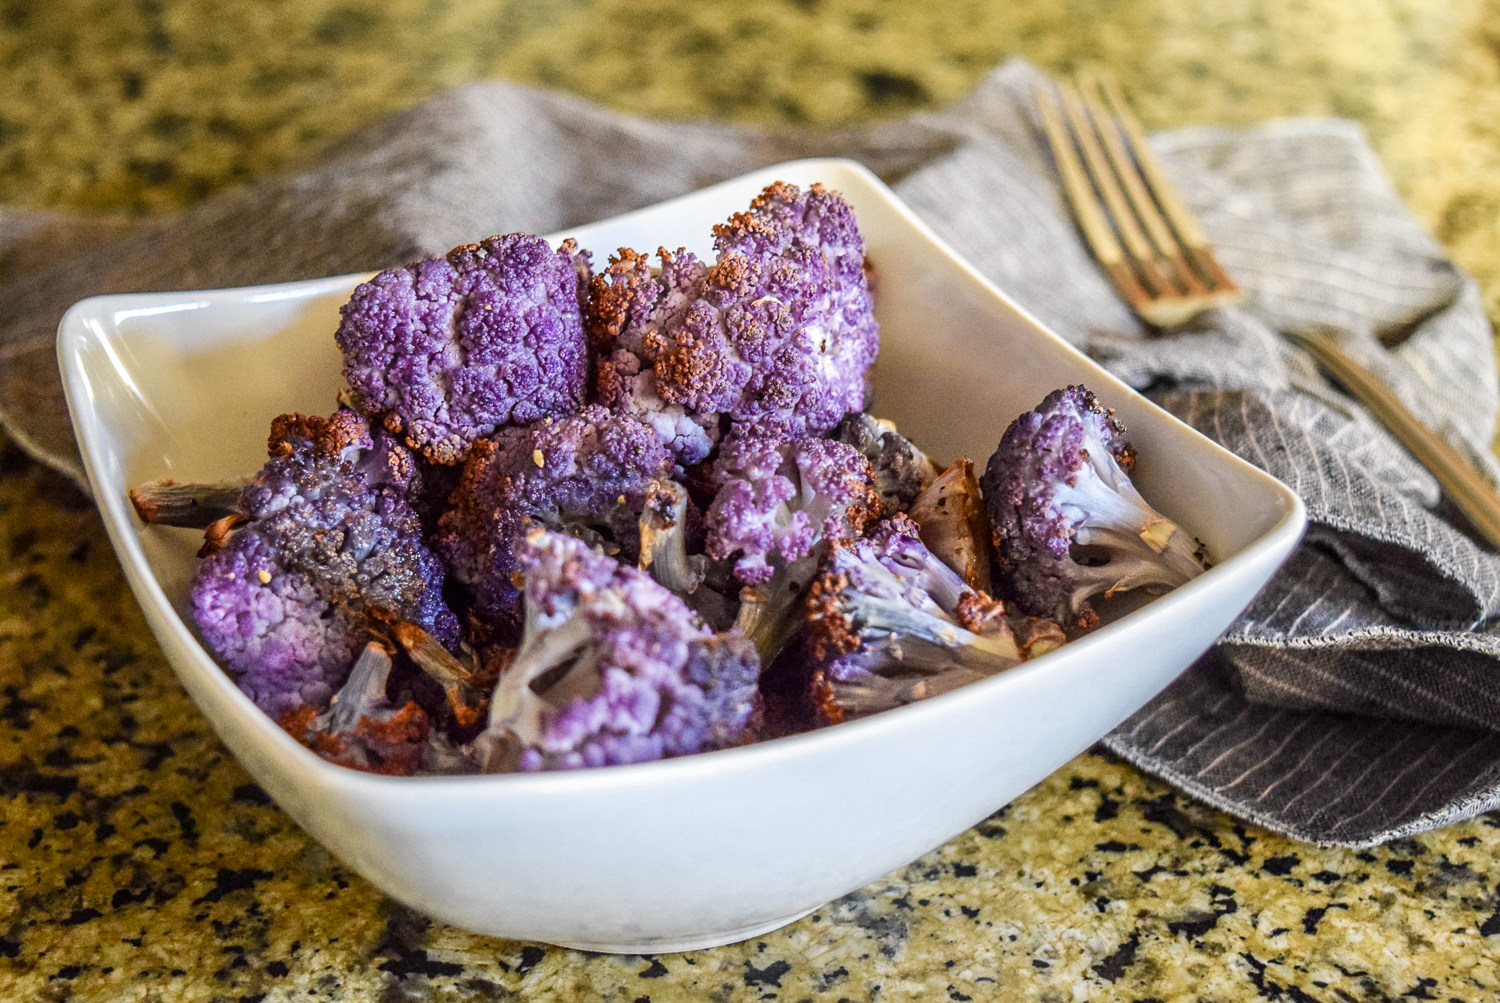 Finished roasted purple cauliflower florets from side angle with fork in background